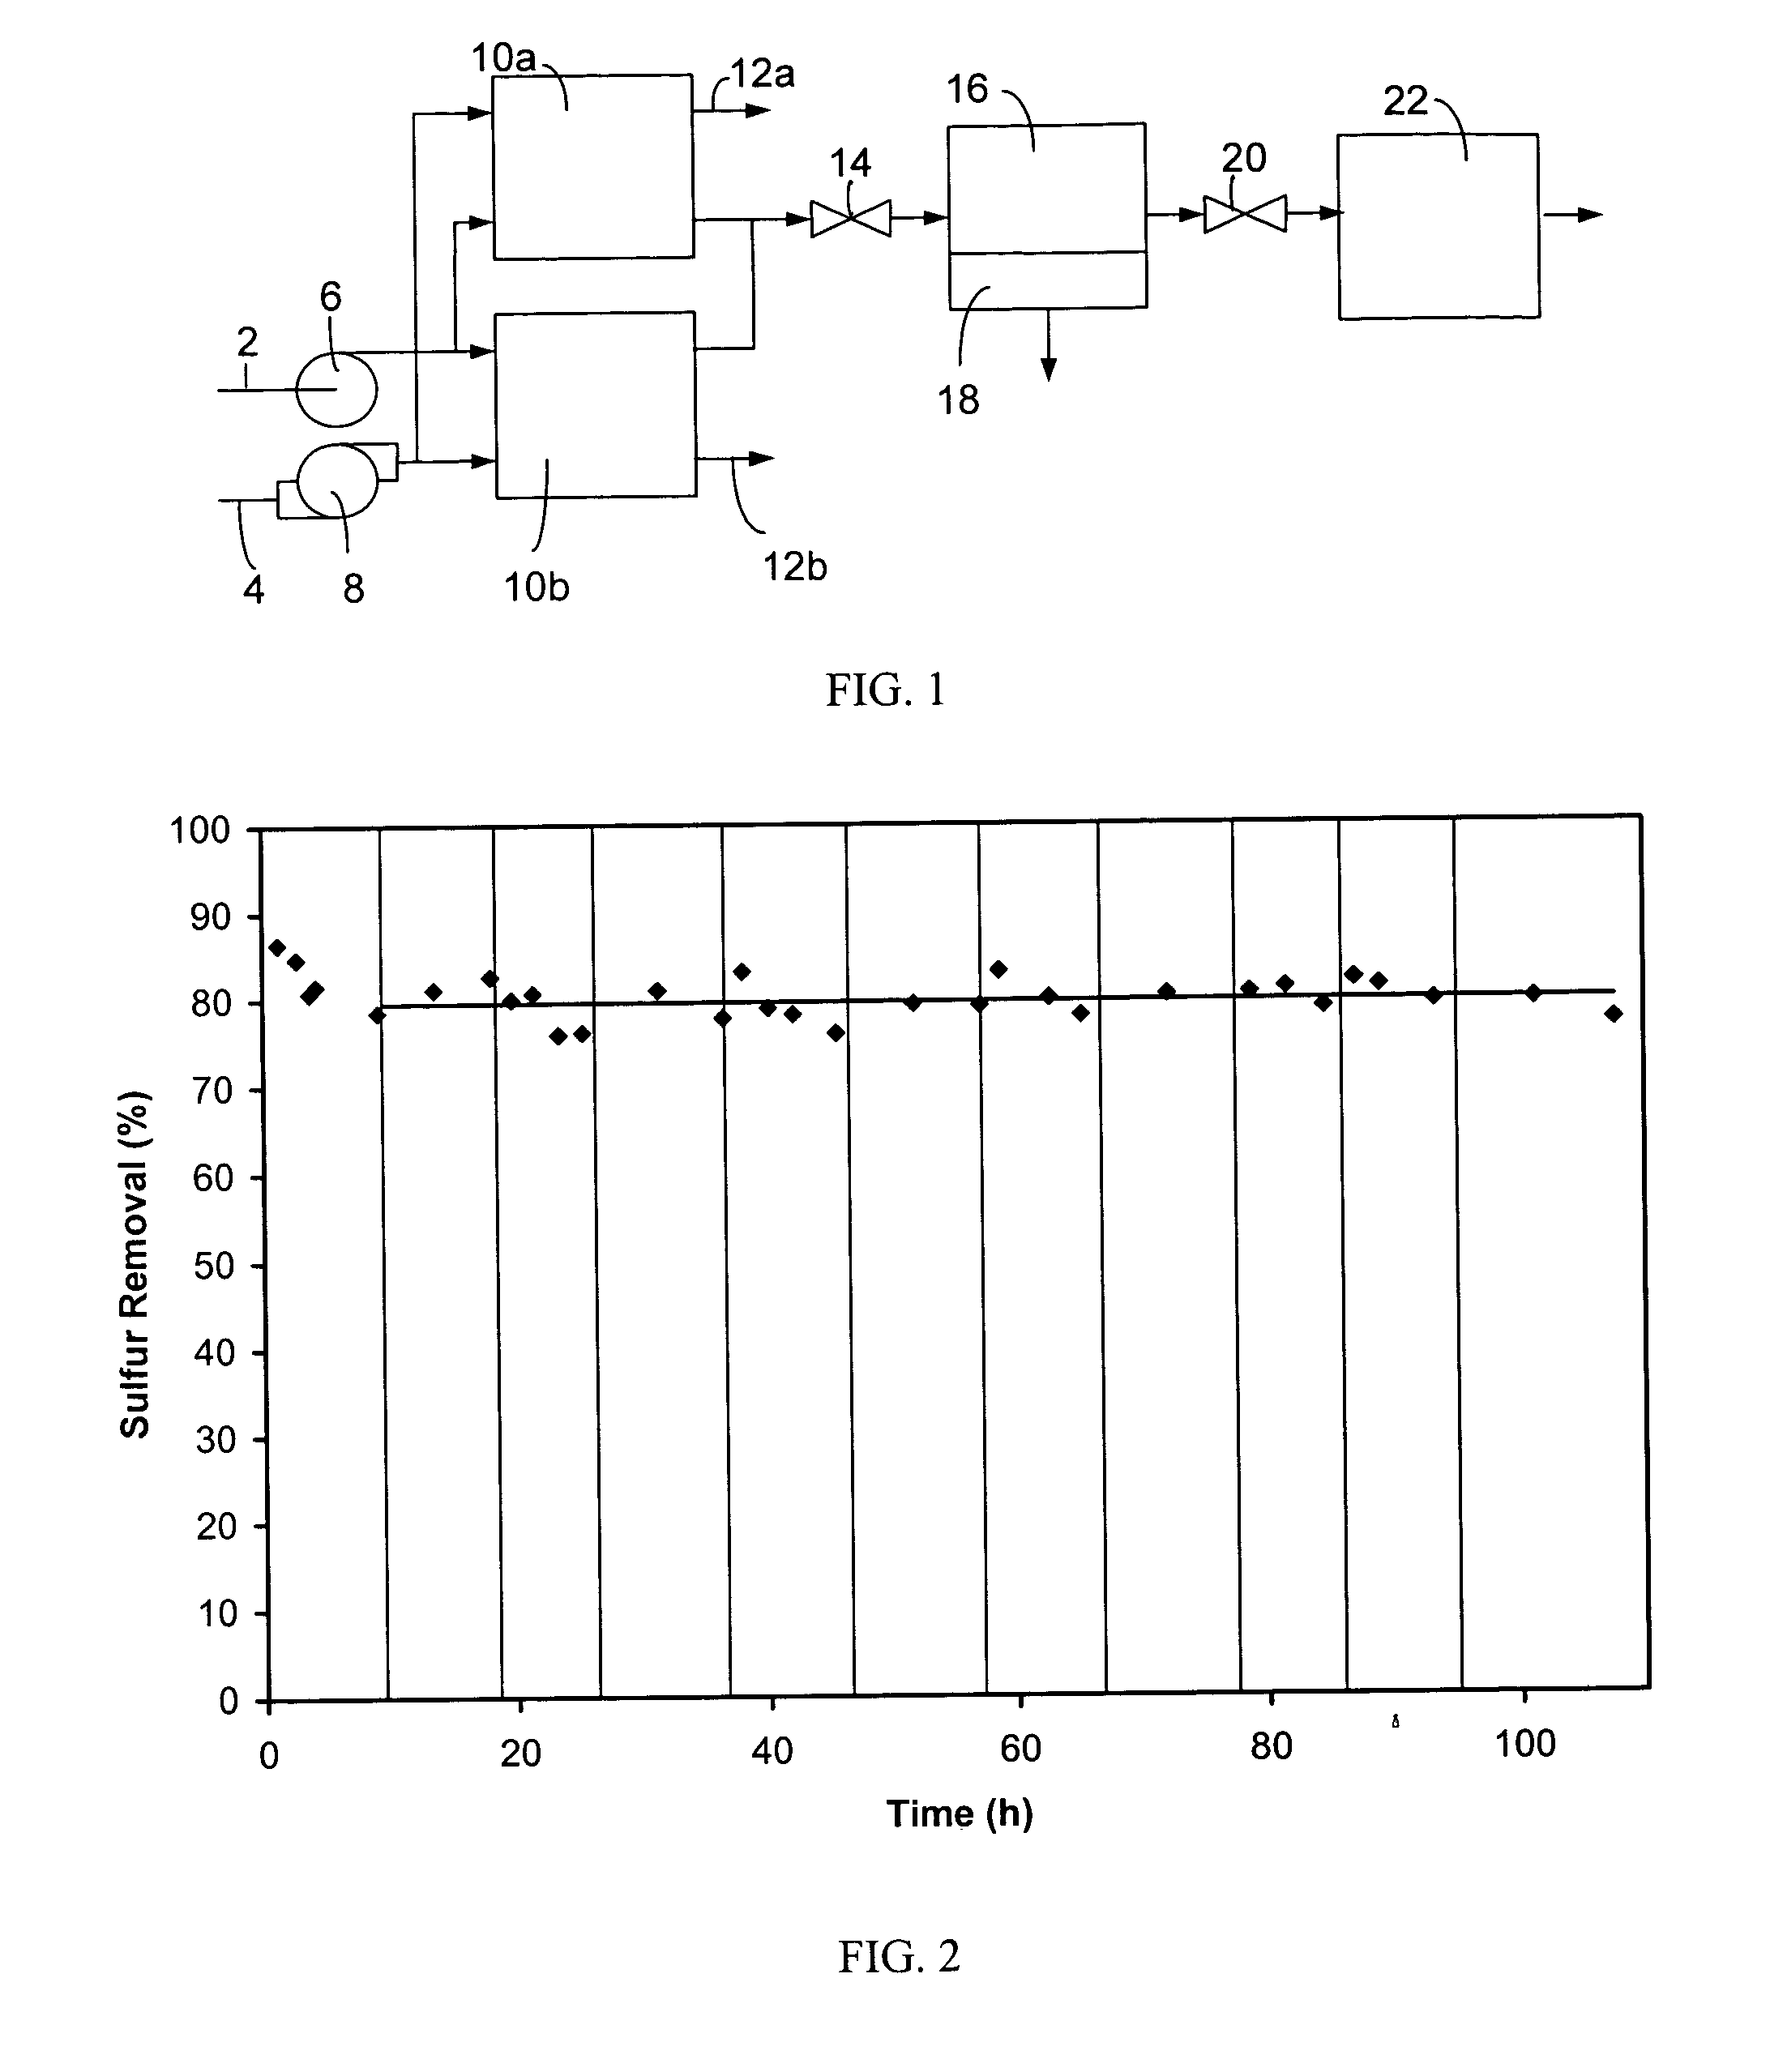 Methods and compositions for desulfurization of hydrocarbon fuels